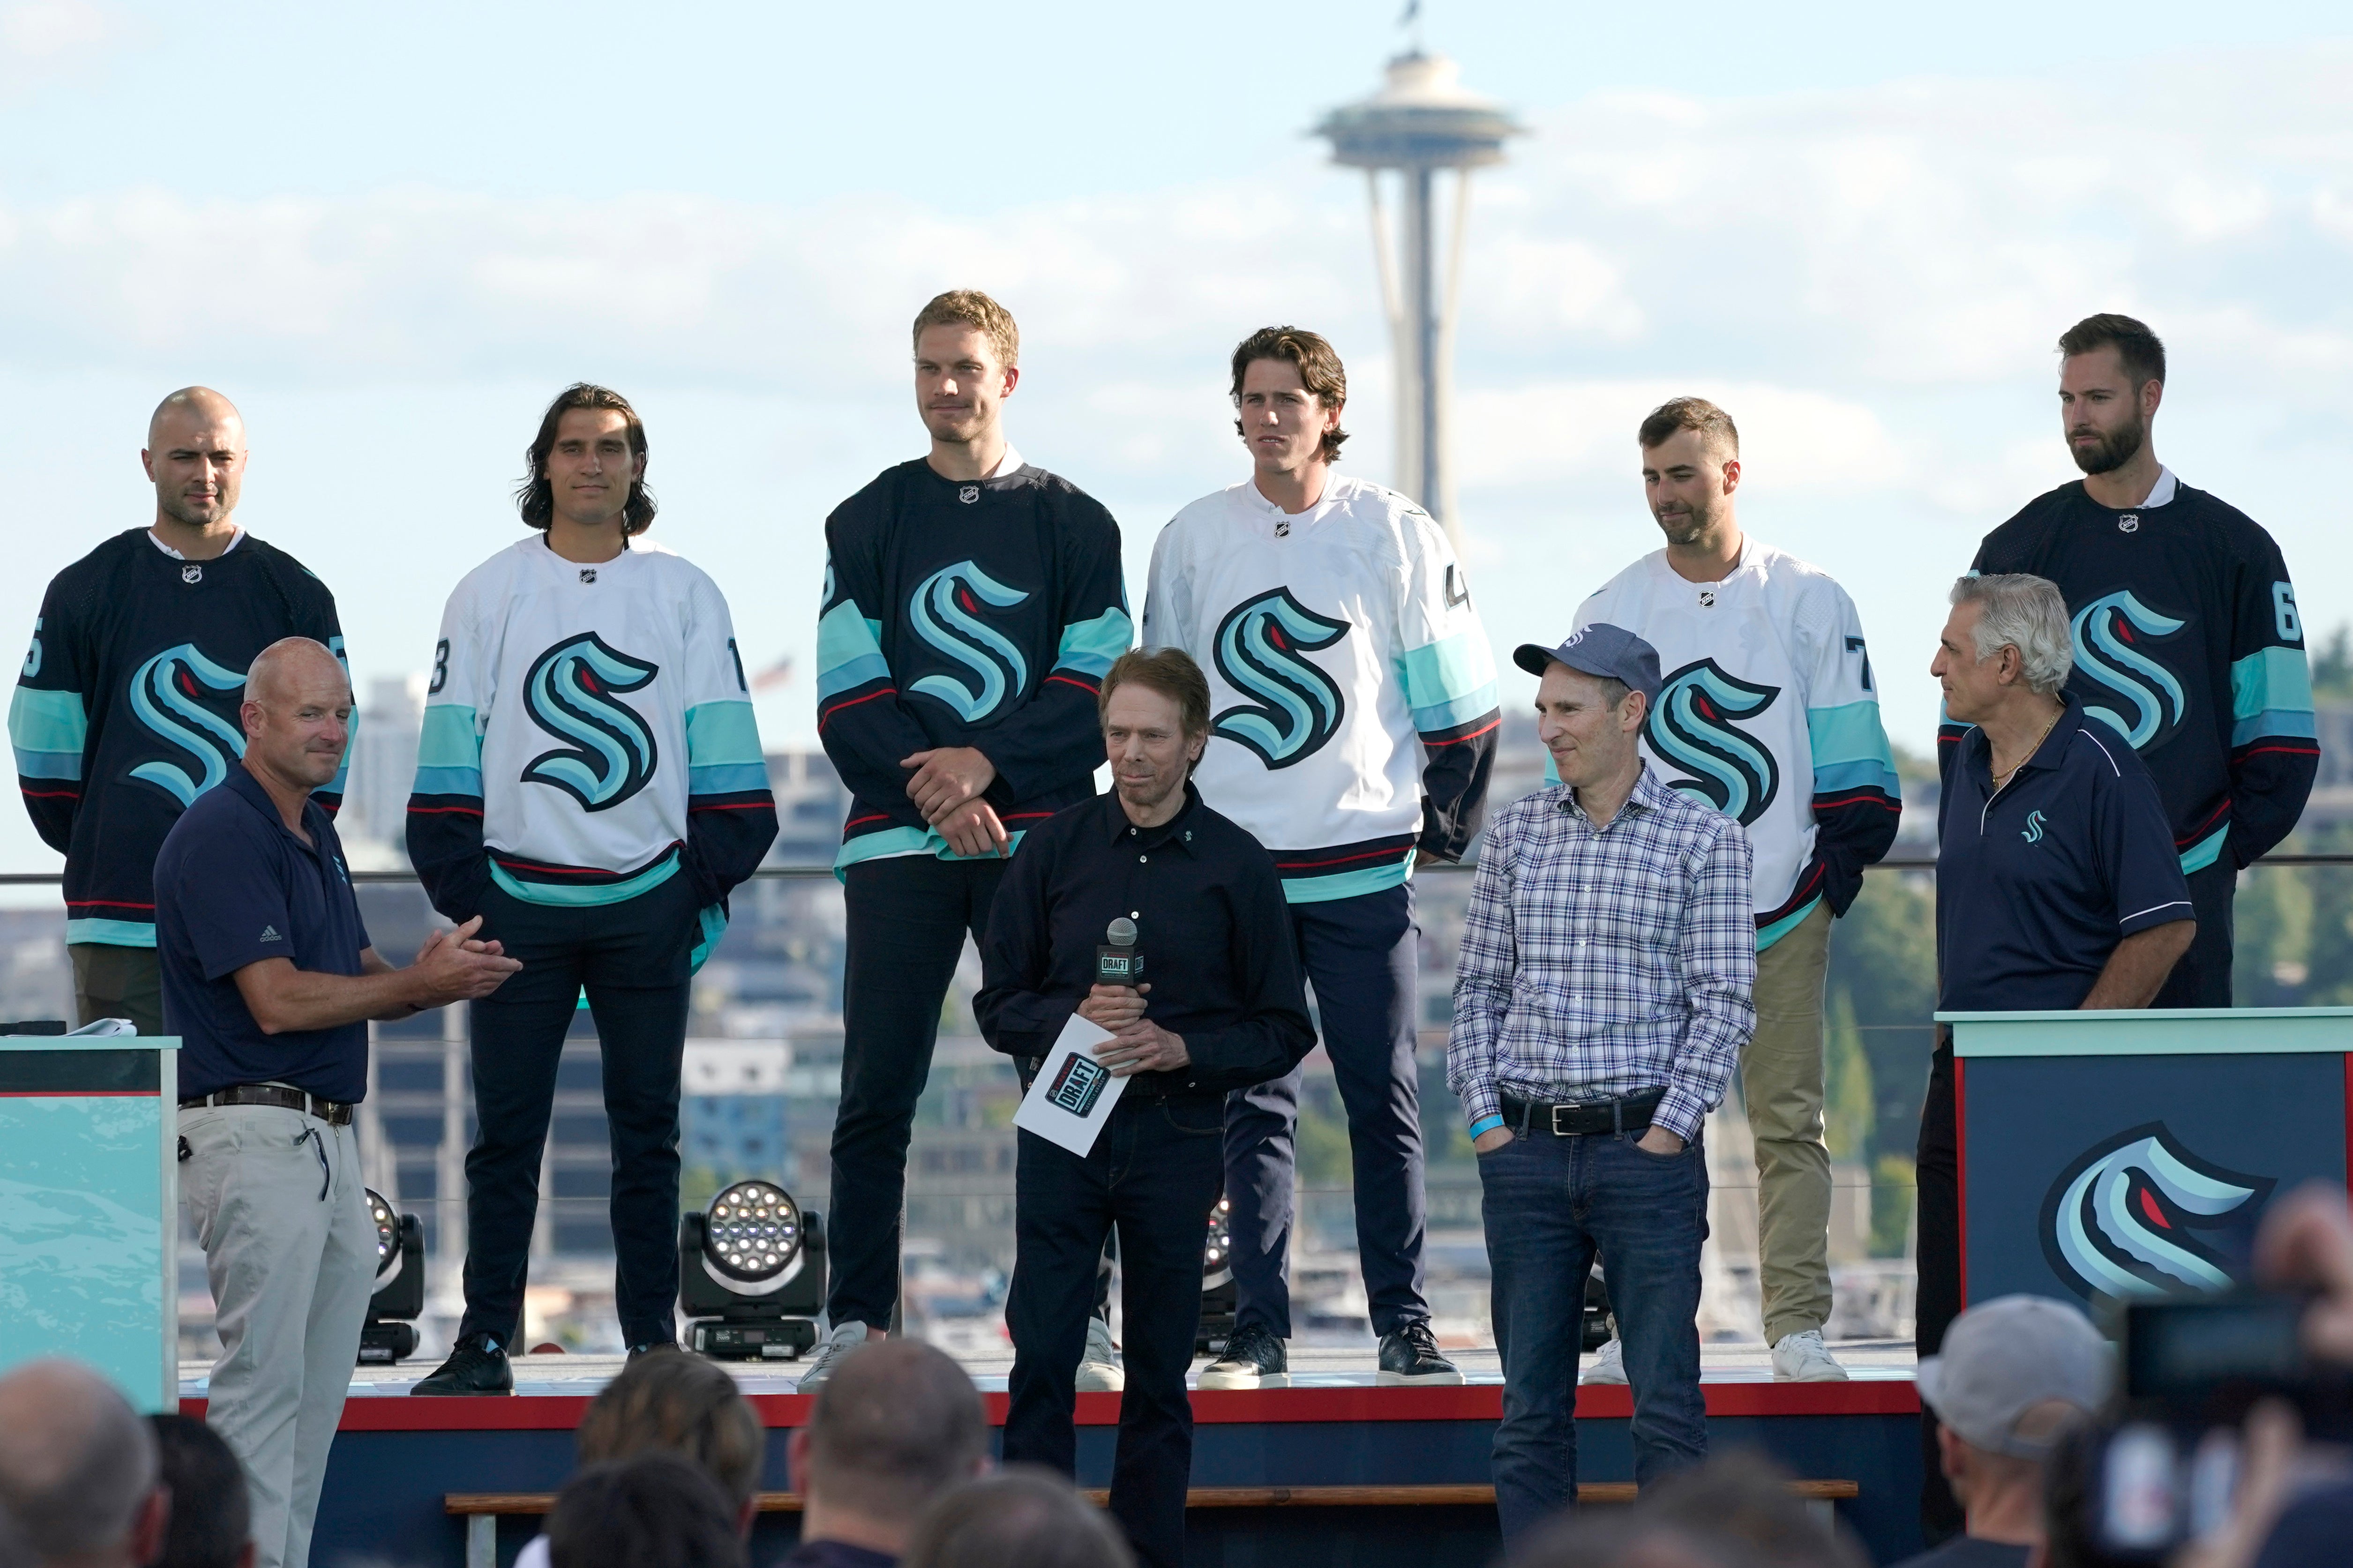 Seattle Kraken is Building its Team the Right Way - The Hockey News